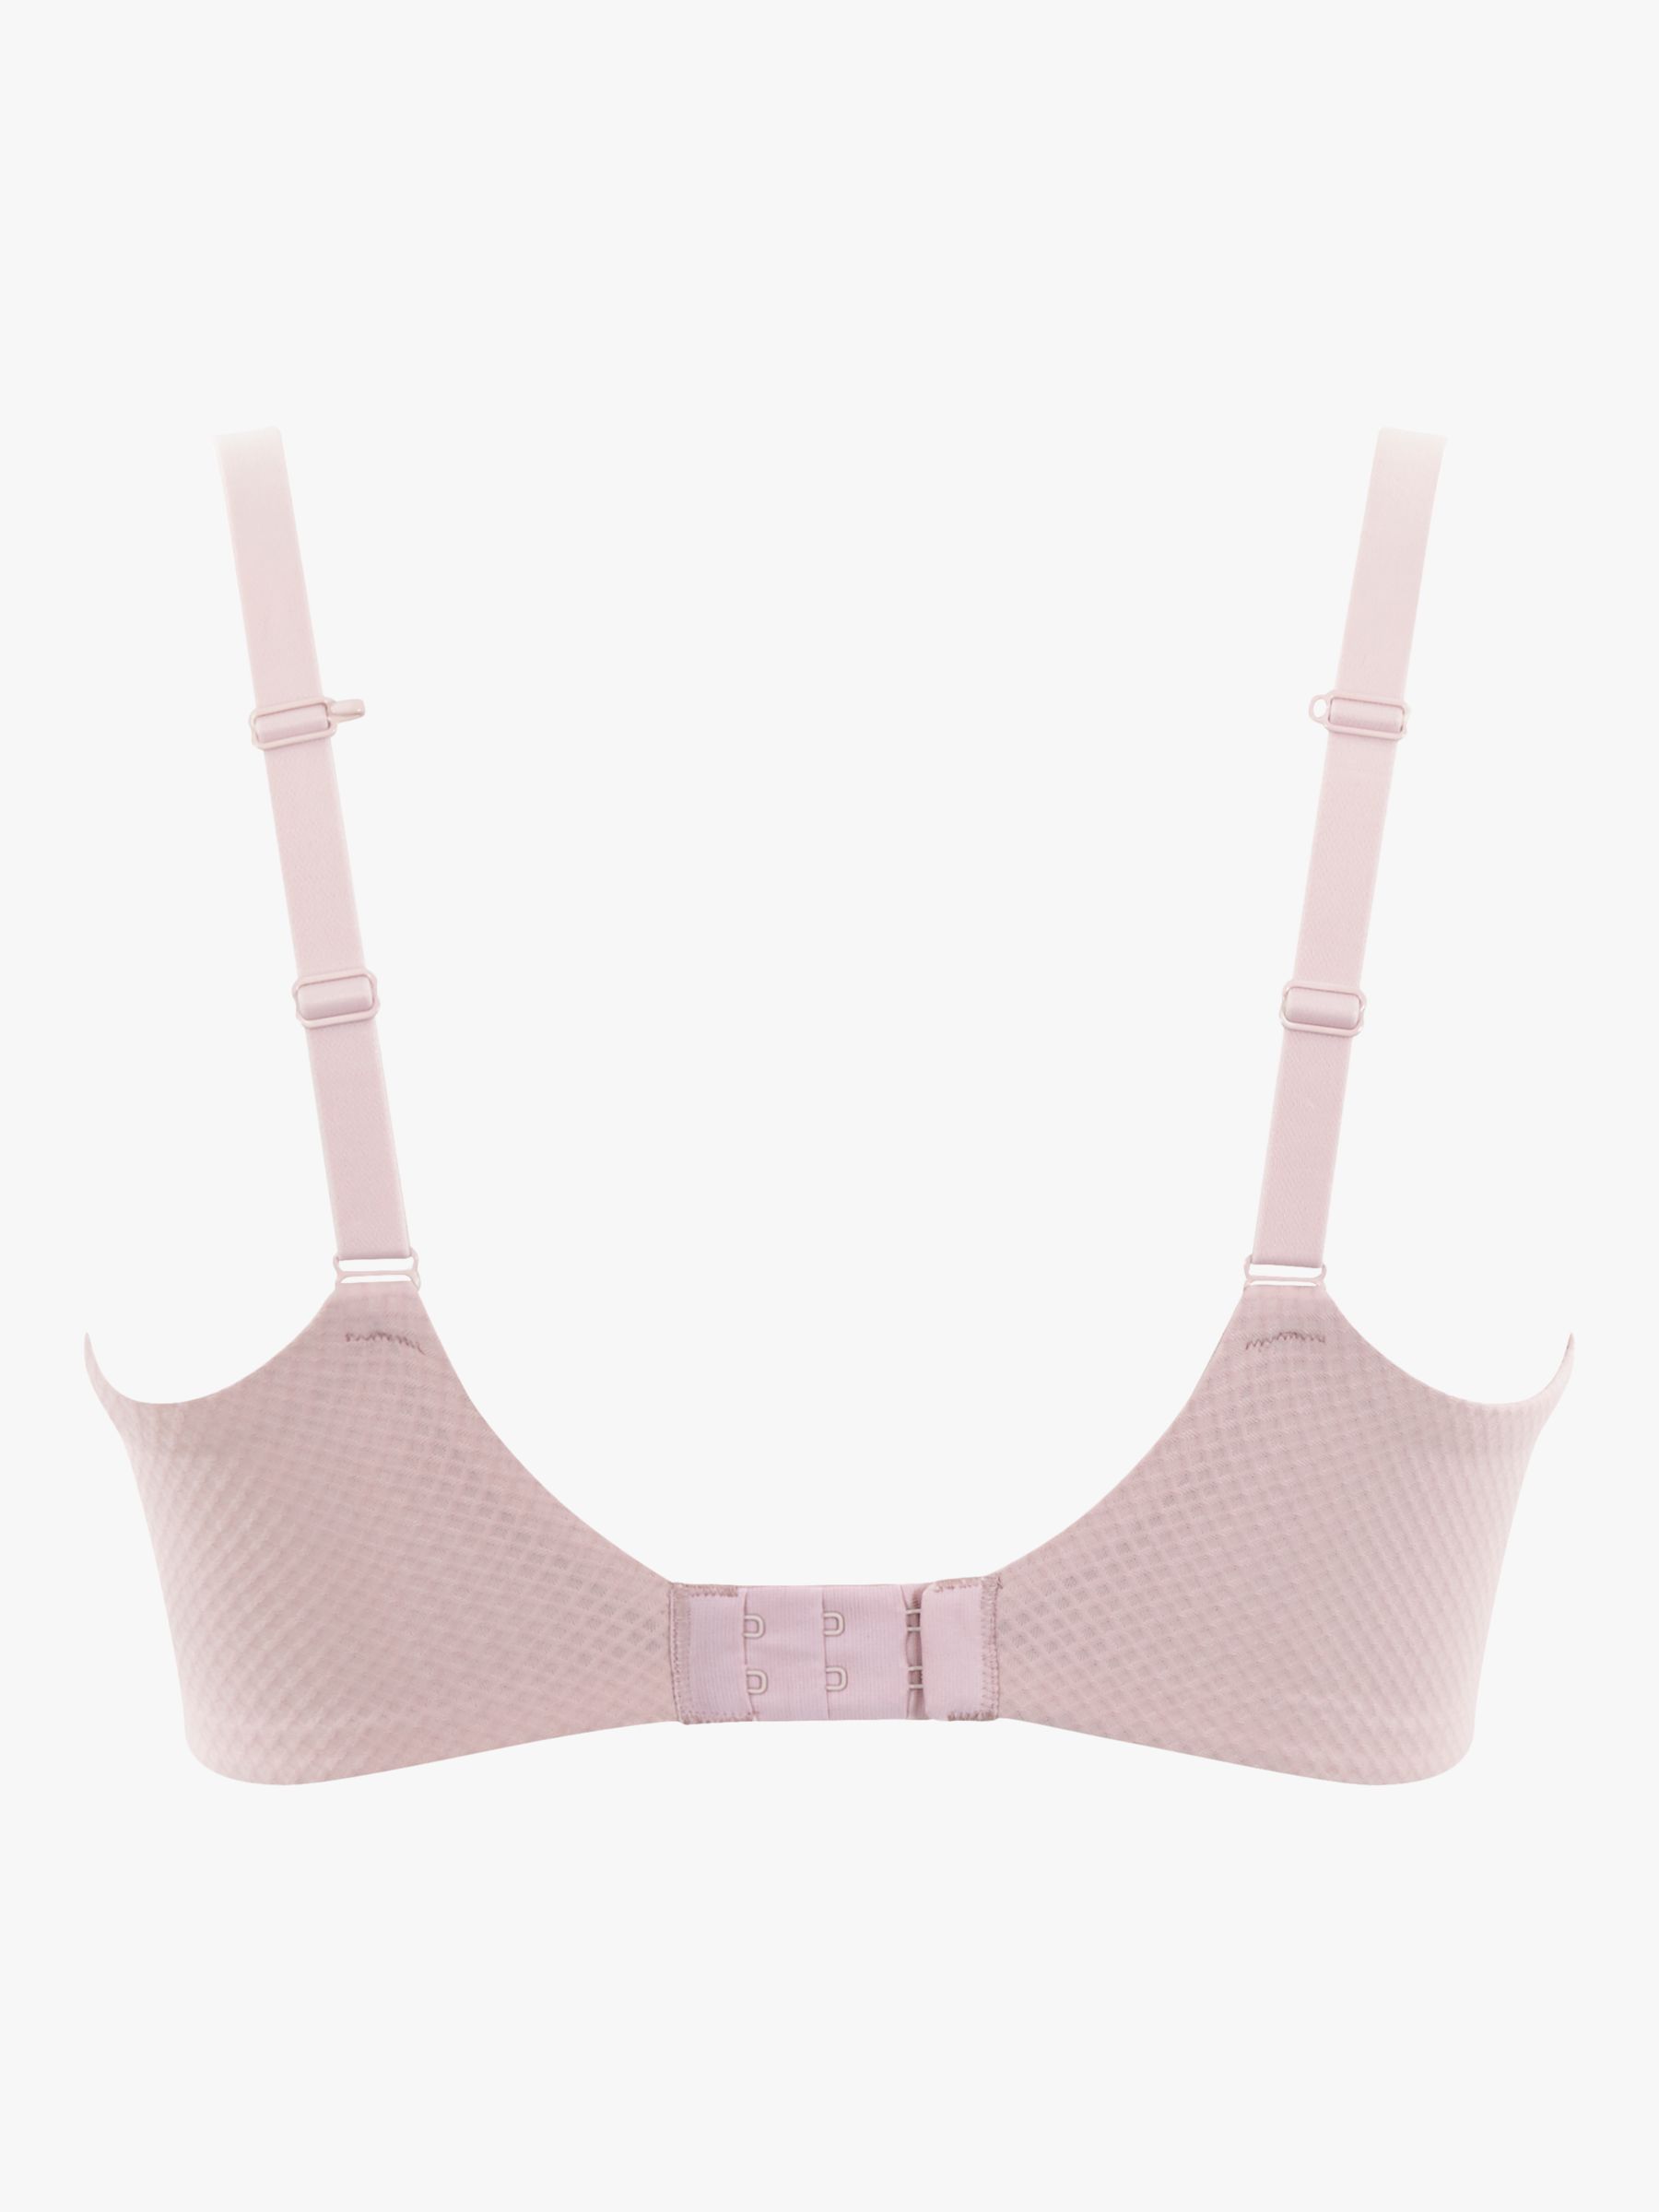 Panache Serene Underwired Full Cup Bra, Vintage at John Lewis & Partners